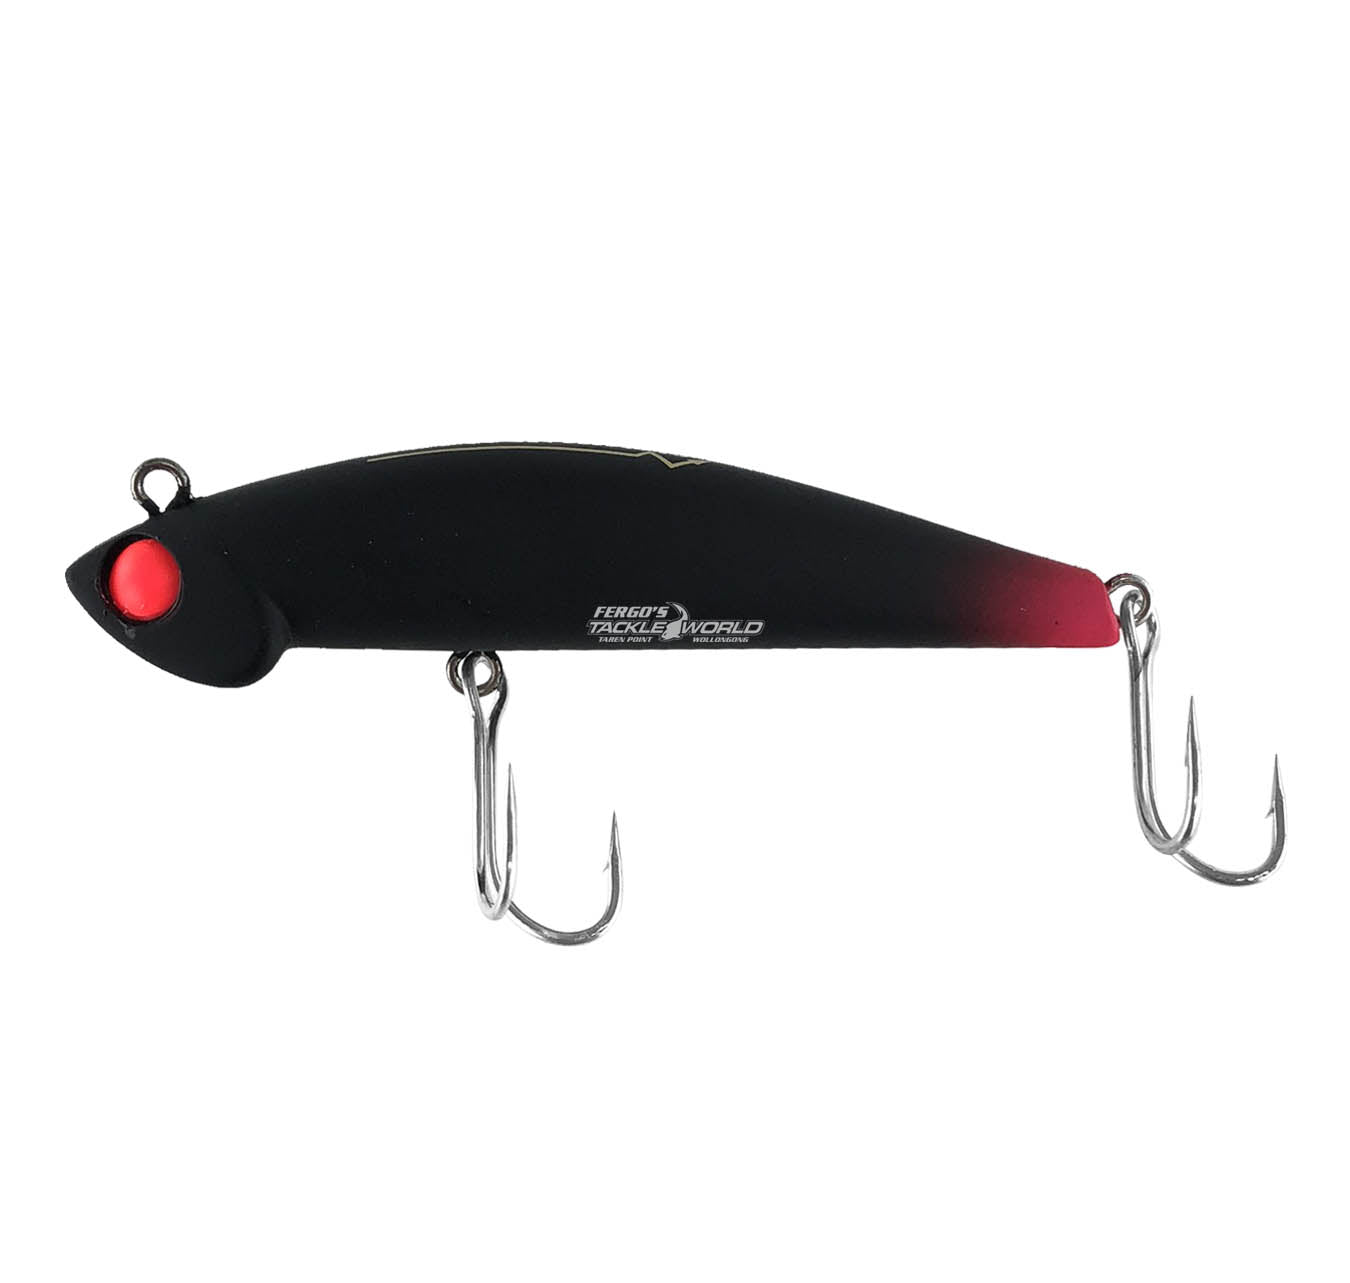 The Best Lure For Kids! - Fergo's Tackle World